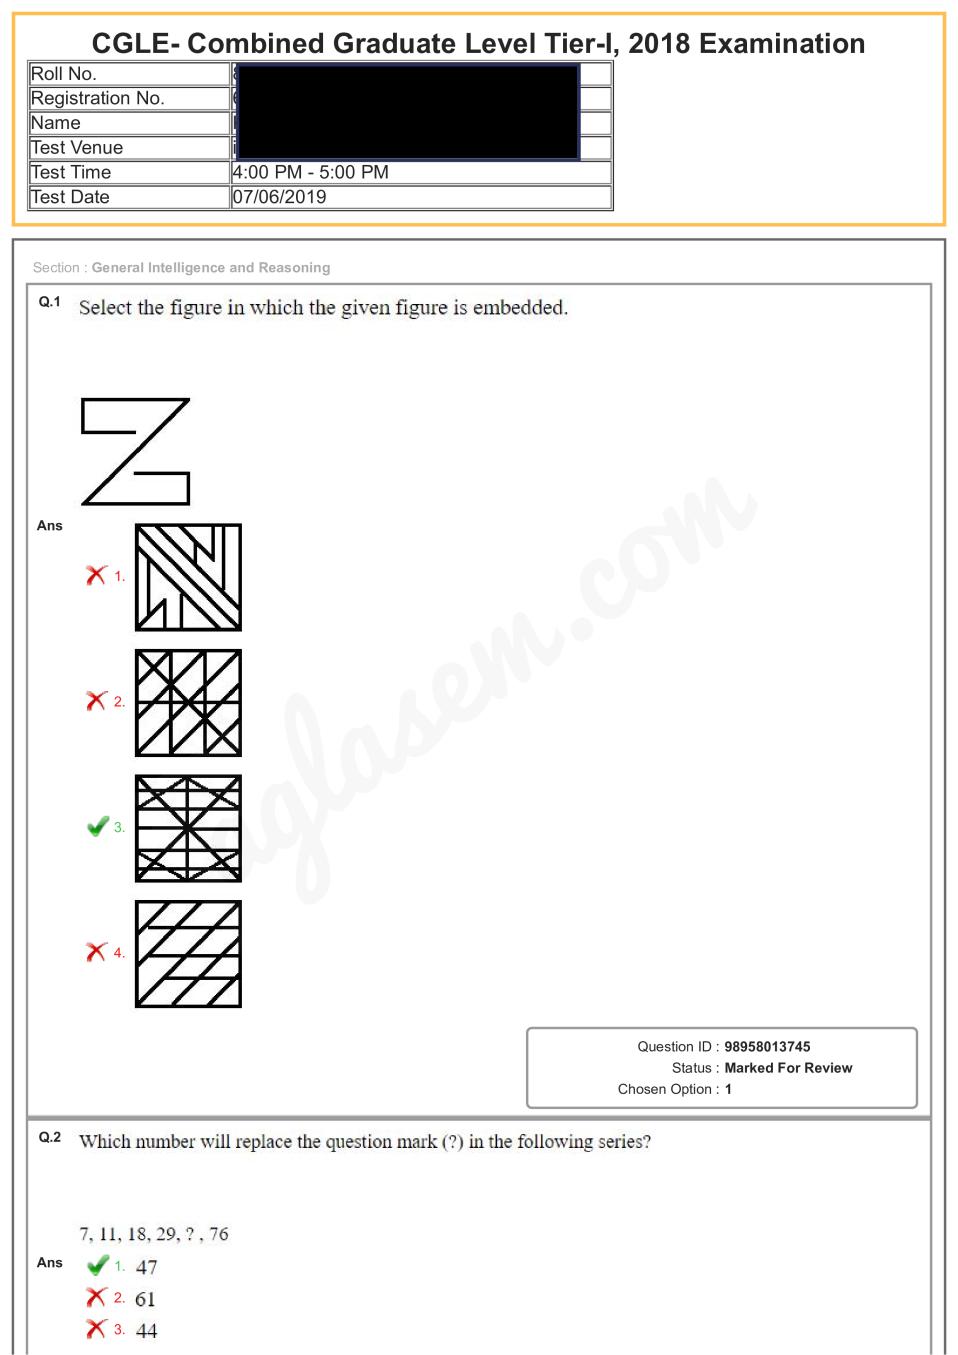 SSC CGL 2018 Question Paper Tier 1 Exam - 07 Jun 2019 Shift 3 - Page 1